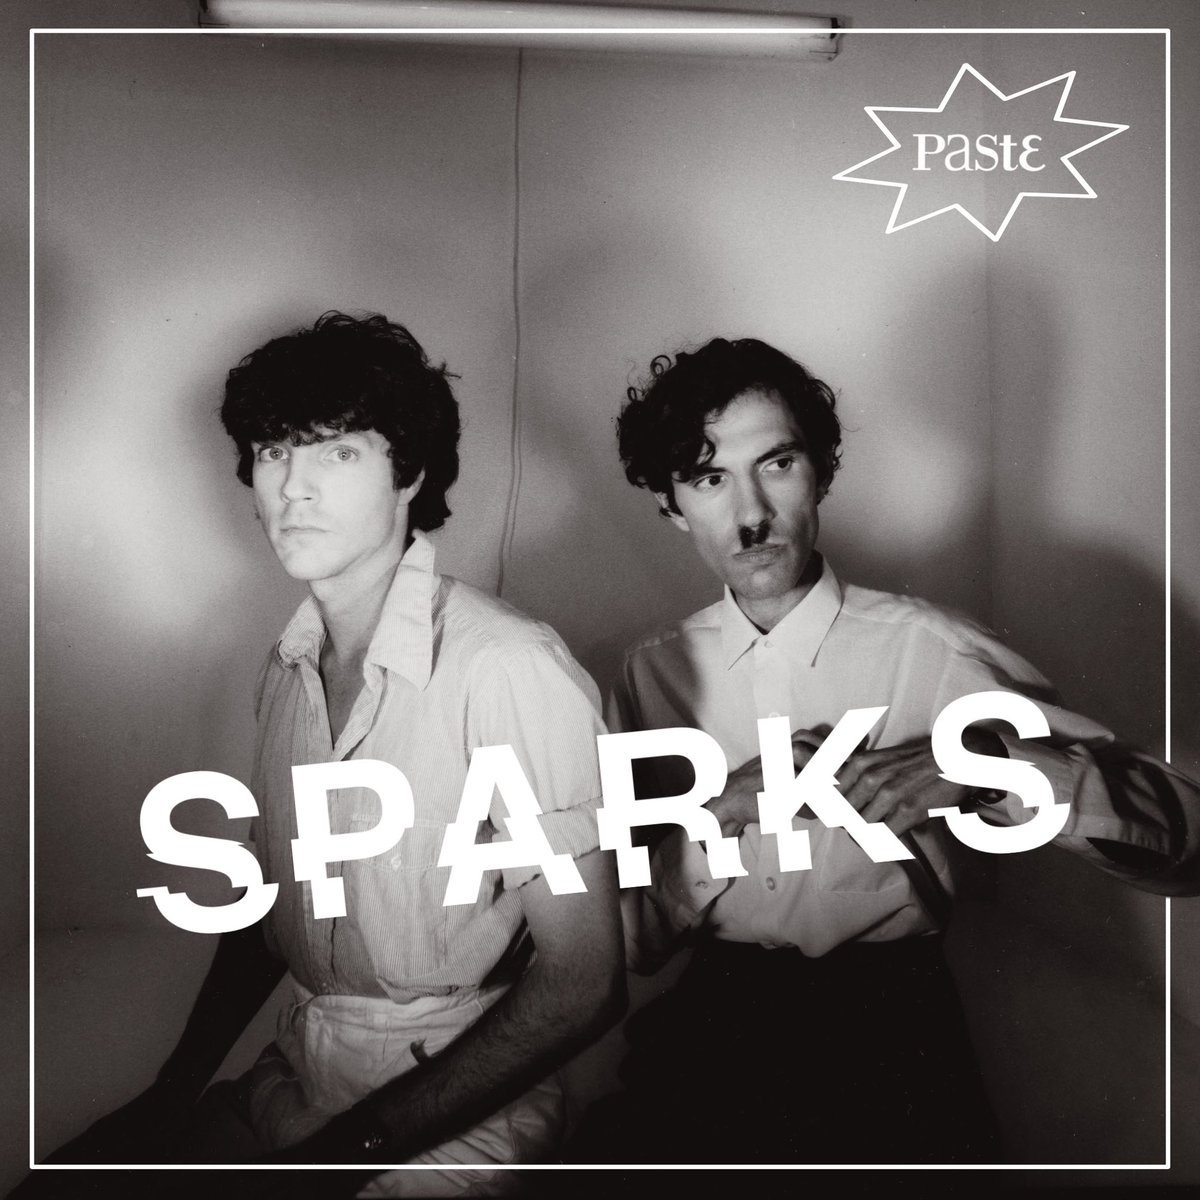 Ron and Russell Mael (@sparksofficial) discuss their magnum opus, ‘No. 1 in Heaven,’ working with Giorgio Moroder, and how they felt their reverence was being threatened by the very punk bands that loved them. ⭐️🔗: pastemagazine.com/music/sparks/l…